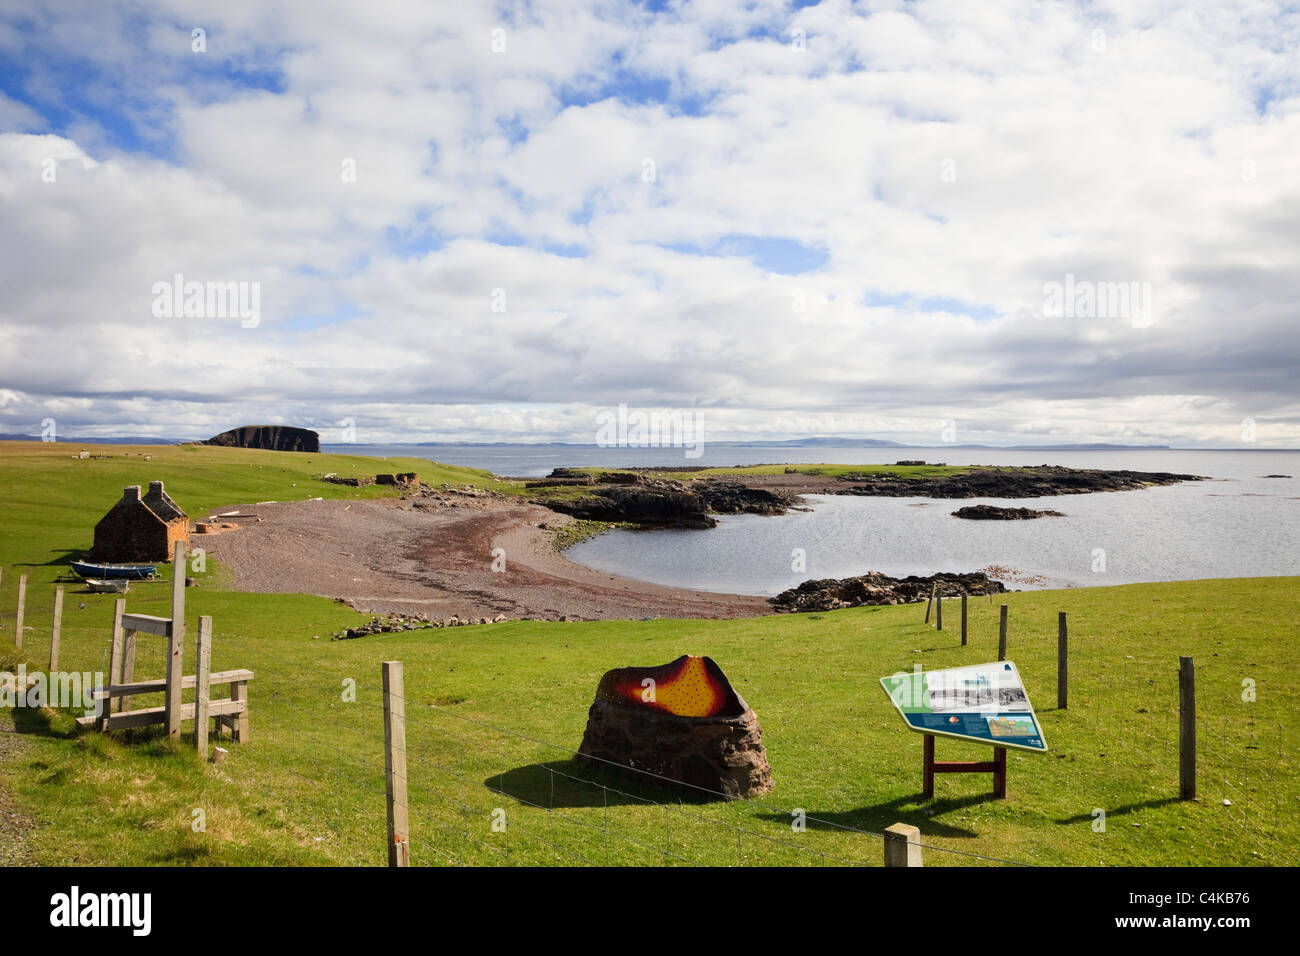 Stenness, Eshaness, Shetland Islands, Scotland, UK. Tourist information at old Haaf station with fishing lodges around bay Stock Photo